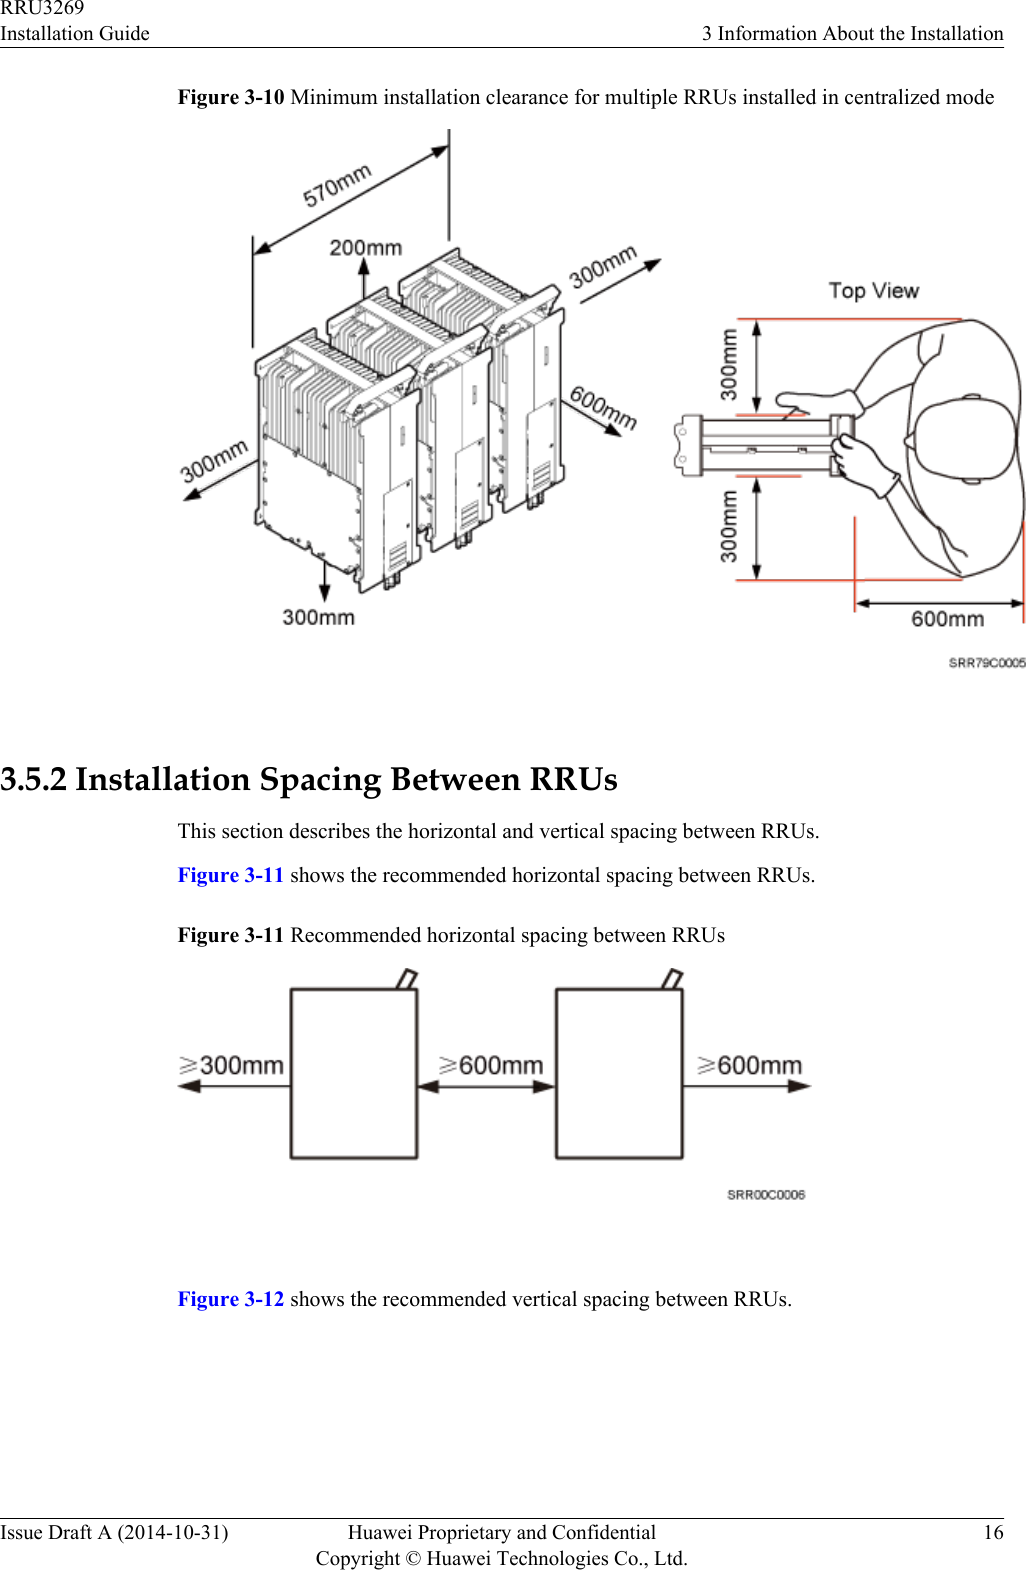 Figure 3-10 Minimum installation clearance for multiple RRUs installed in centralized mode 3.5.2 Installation Spacing Between RRUsThis section describes the horizontal and vertical spacing between RRUs.Figure 3-11 shows the recommended horizontal spacing between RRUs.Figure 3-11 Recommended horizontal spacing between RRUs Figure 3-12 shows the recommended vertical spacing between RRUs.RRU3269Installation Guide 3 Information About the InstallationIssue Draft A (2014-10-31) Huawei Proprietary and ConfidentialCopyright © Huawei Technologies Co., Ltd.16